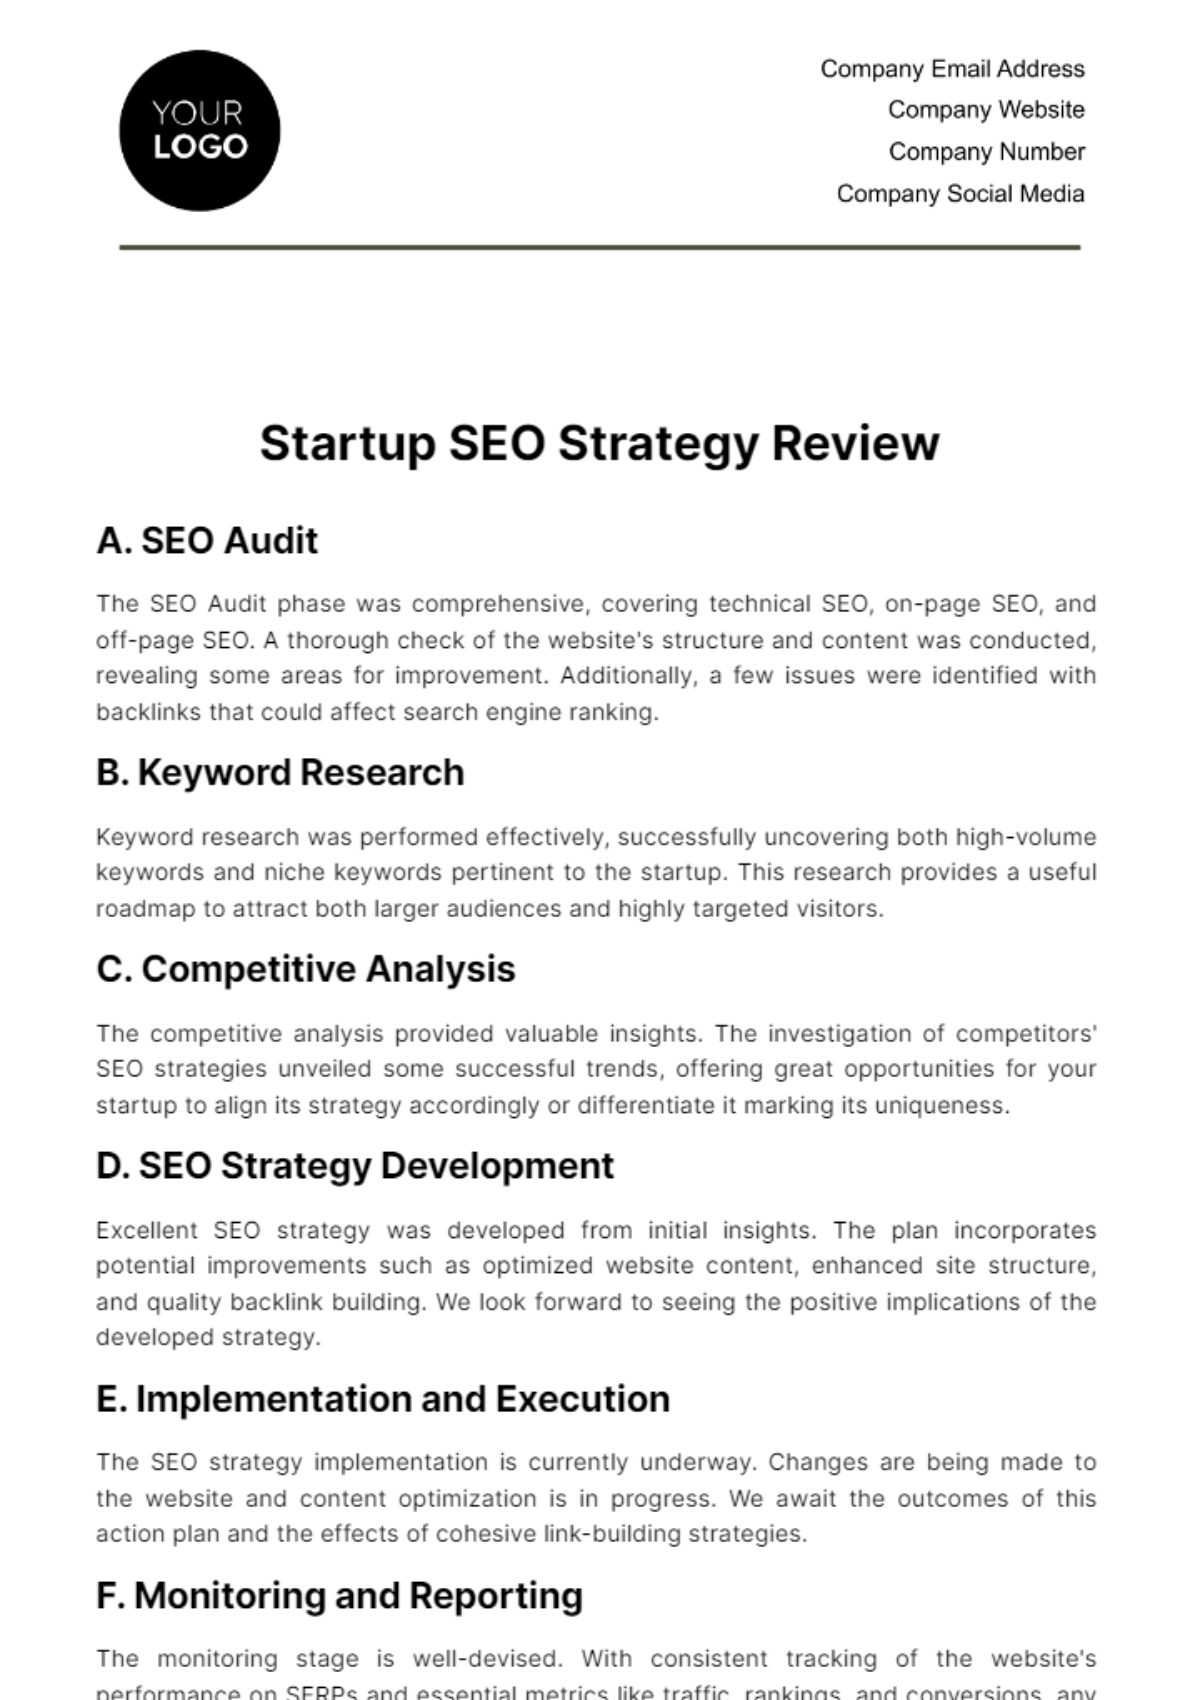 Startup SEO Strategy Review Template